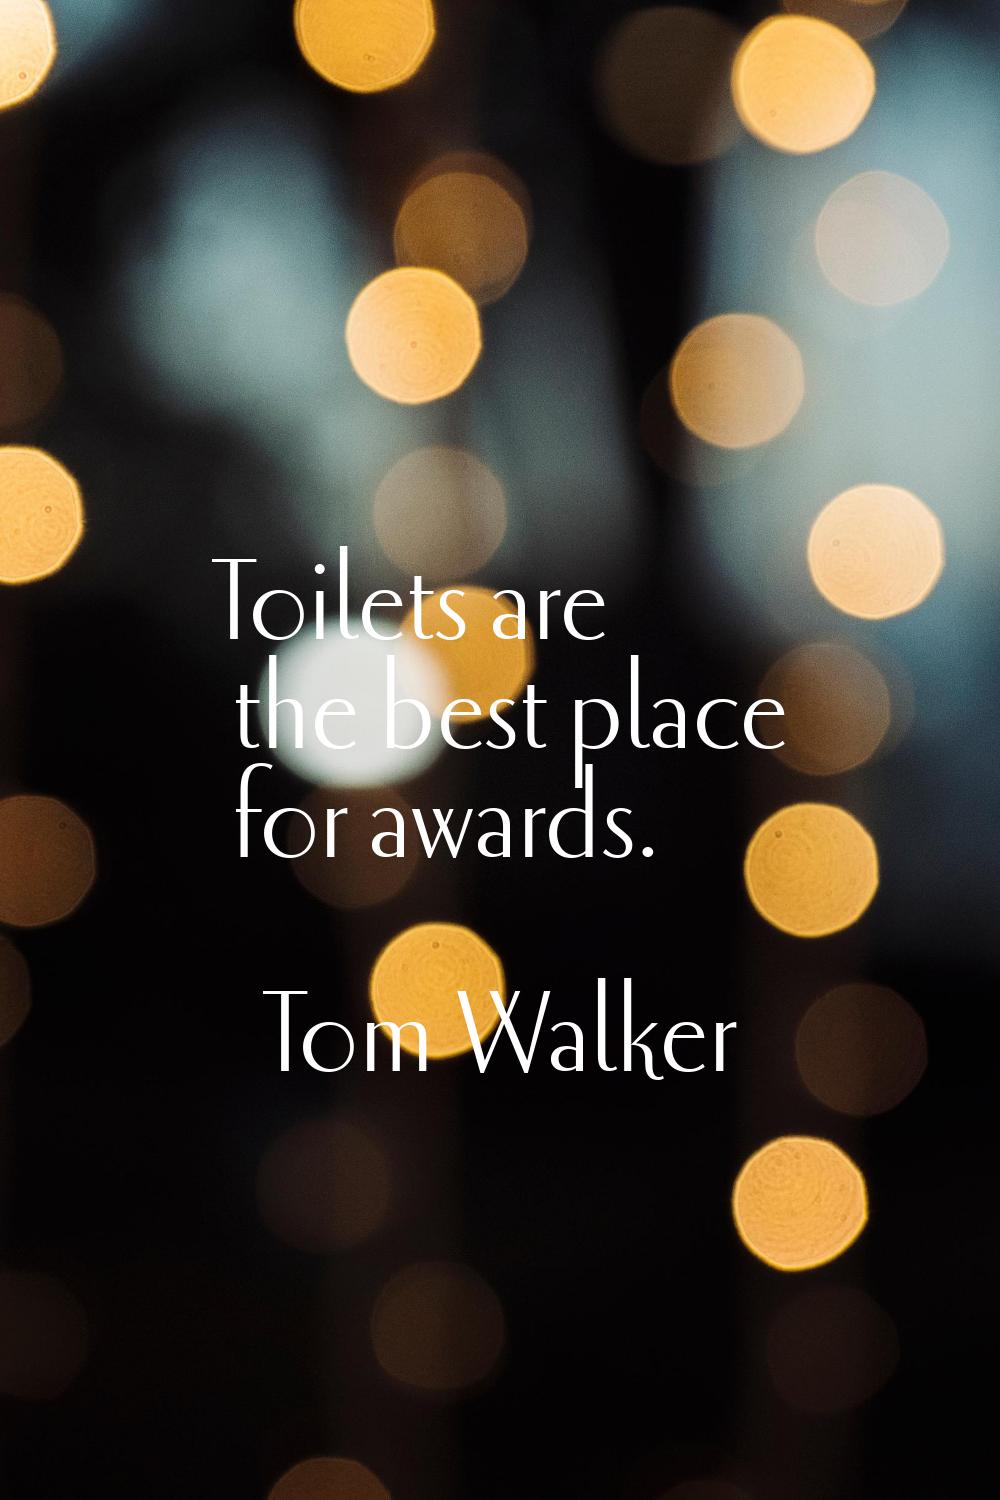 Toilets are the best place for awards.